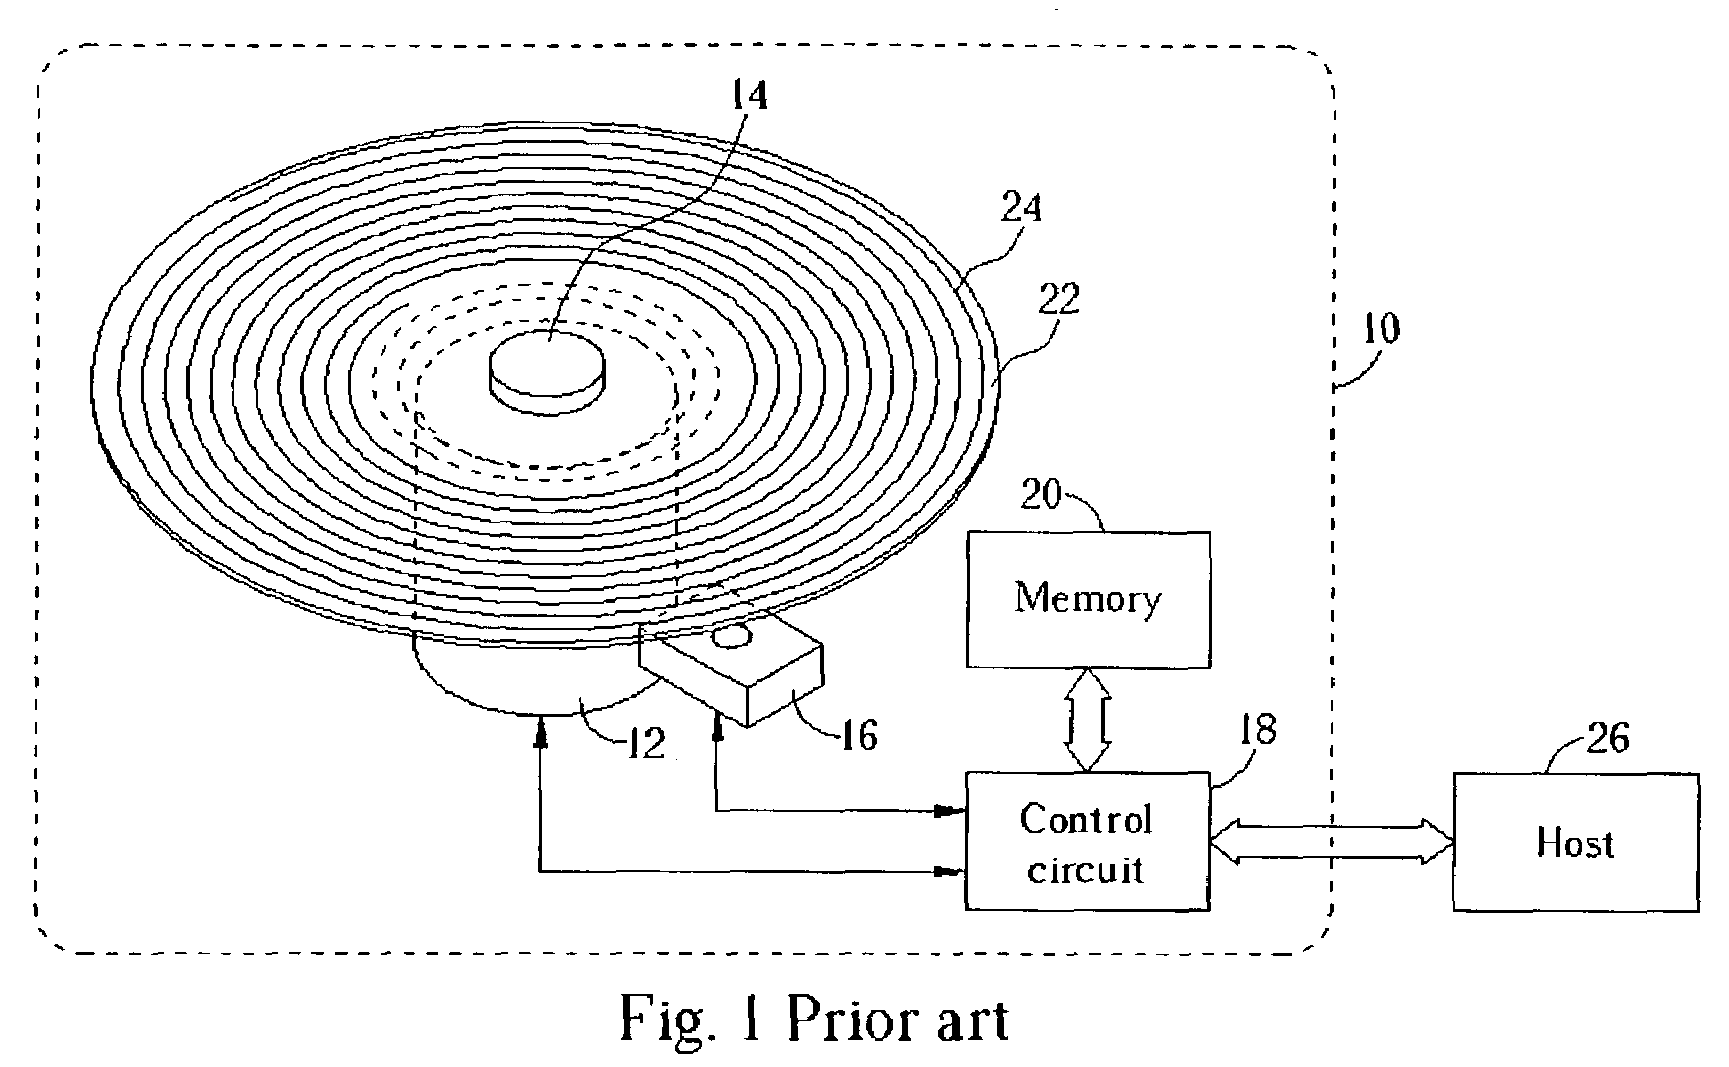 Memory manage method for defect management of an optical disk